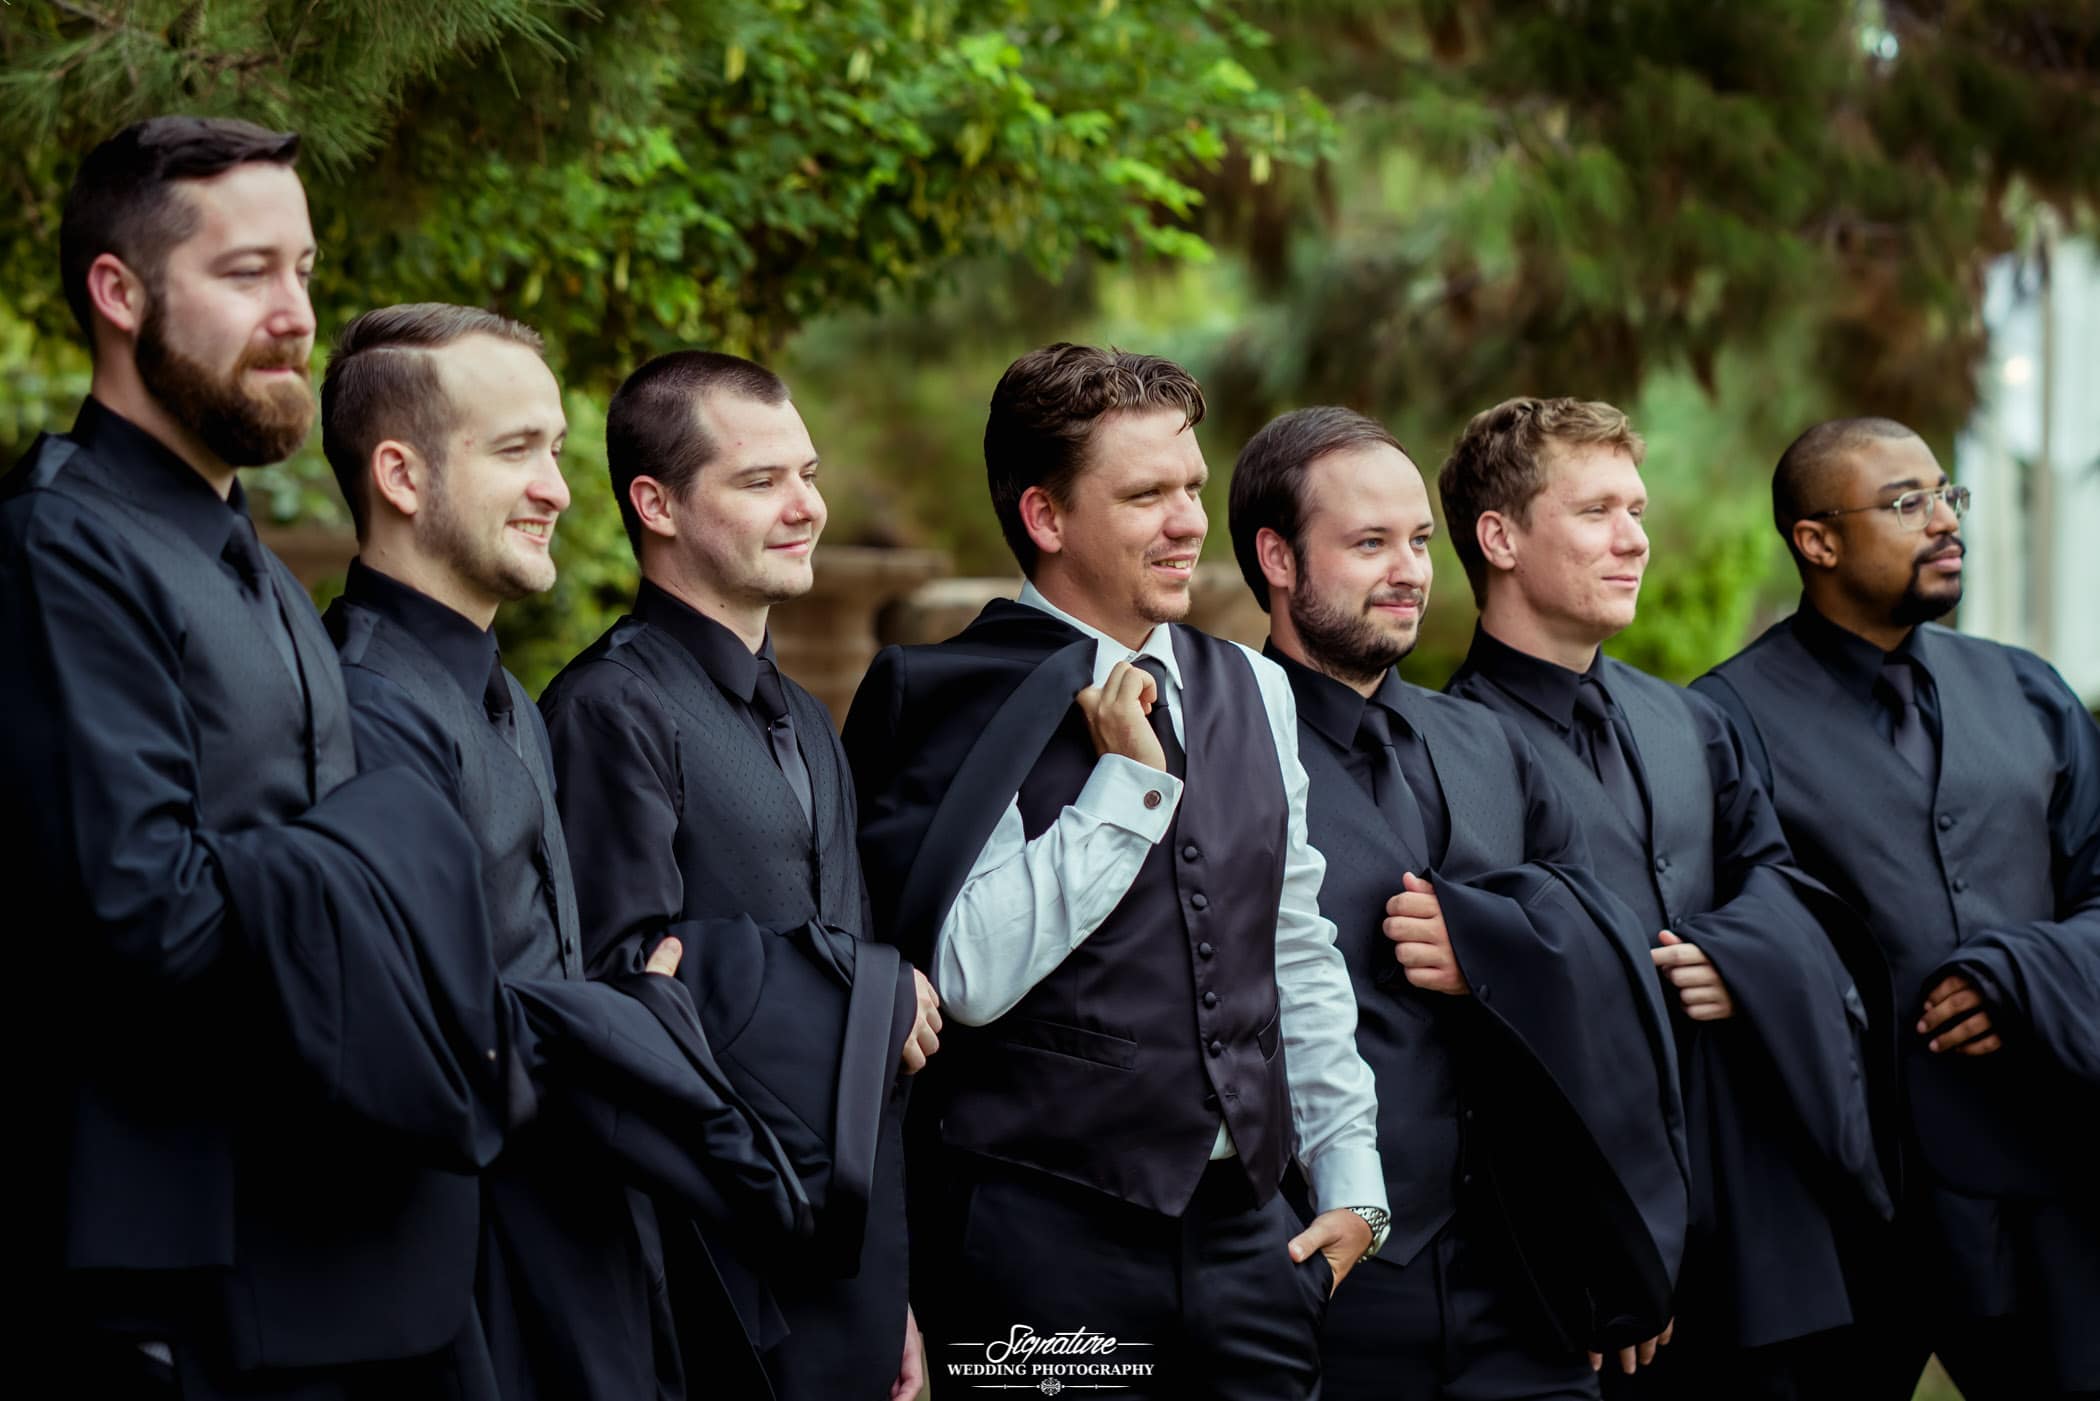 Groom and groomsmen holding jackets in arms